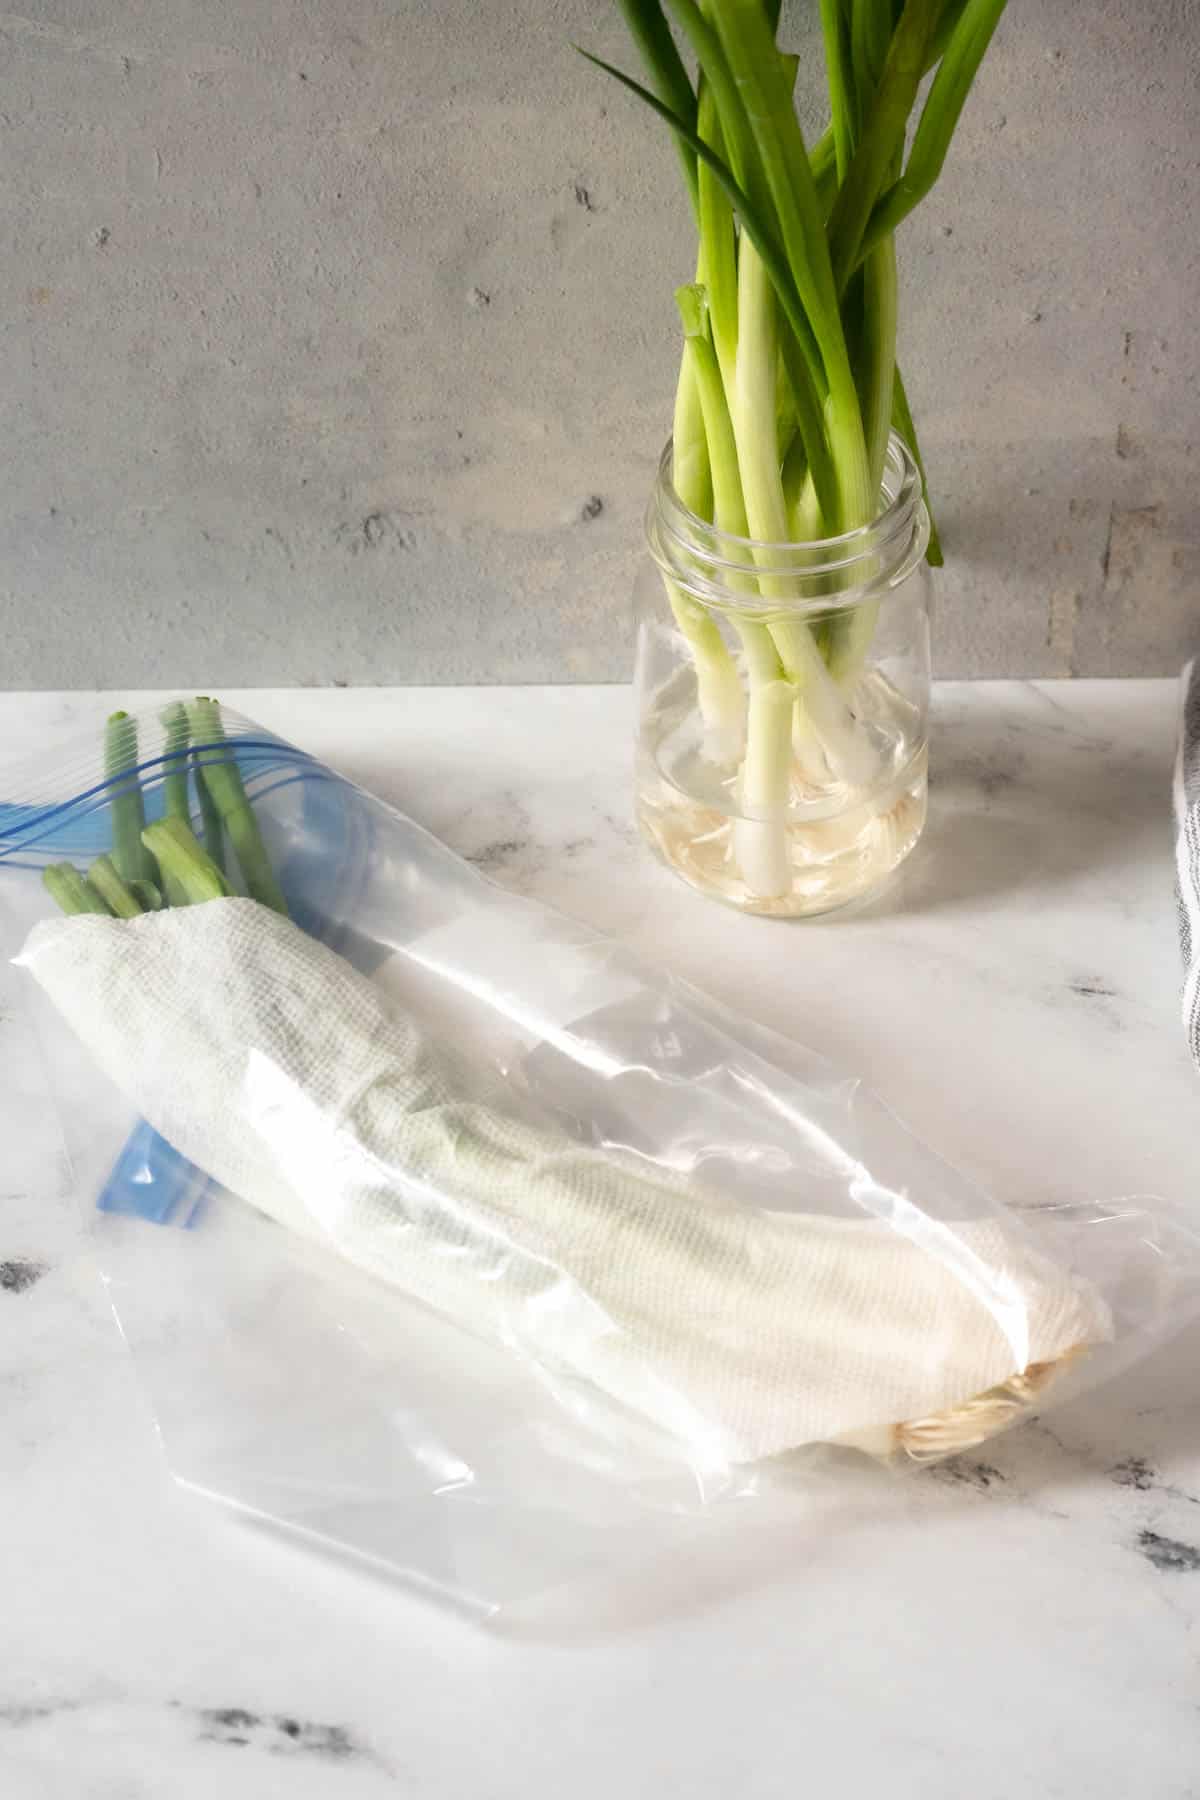 Two bunches of green onions one in a glass of water the other in a plastic bag.